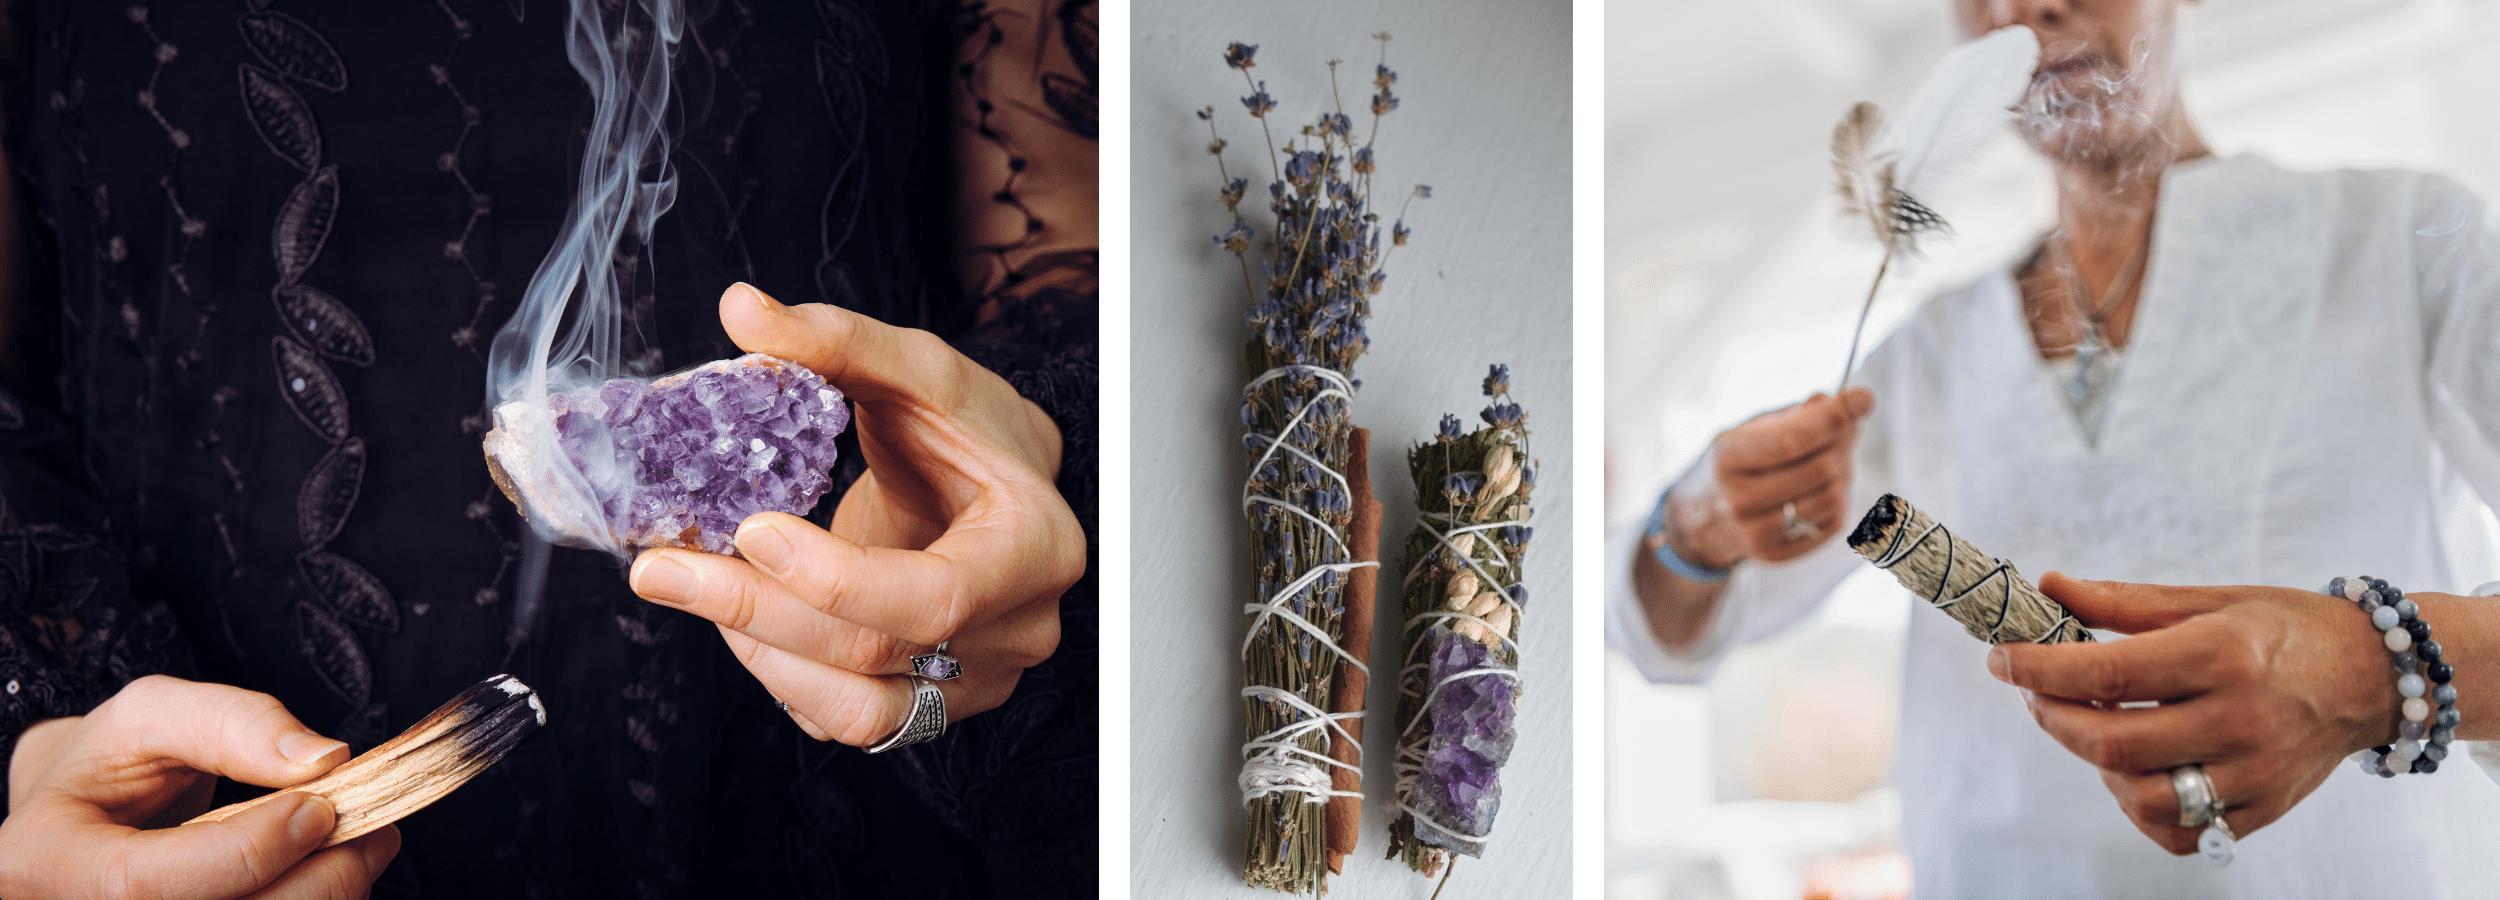 Smudging a crystal with palo santo, smudging sticks with dried herbs, and smudging a room with sage.